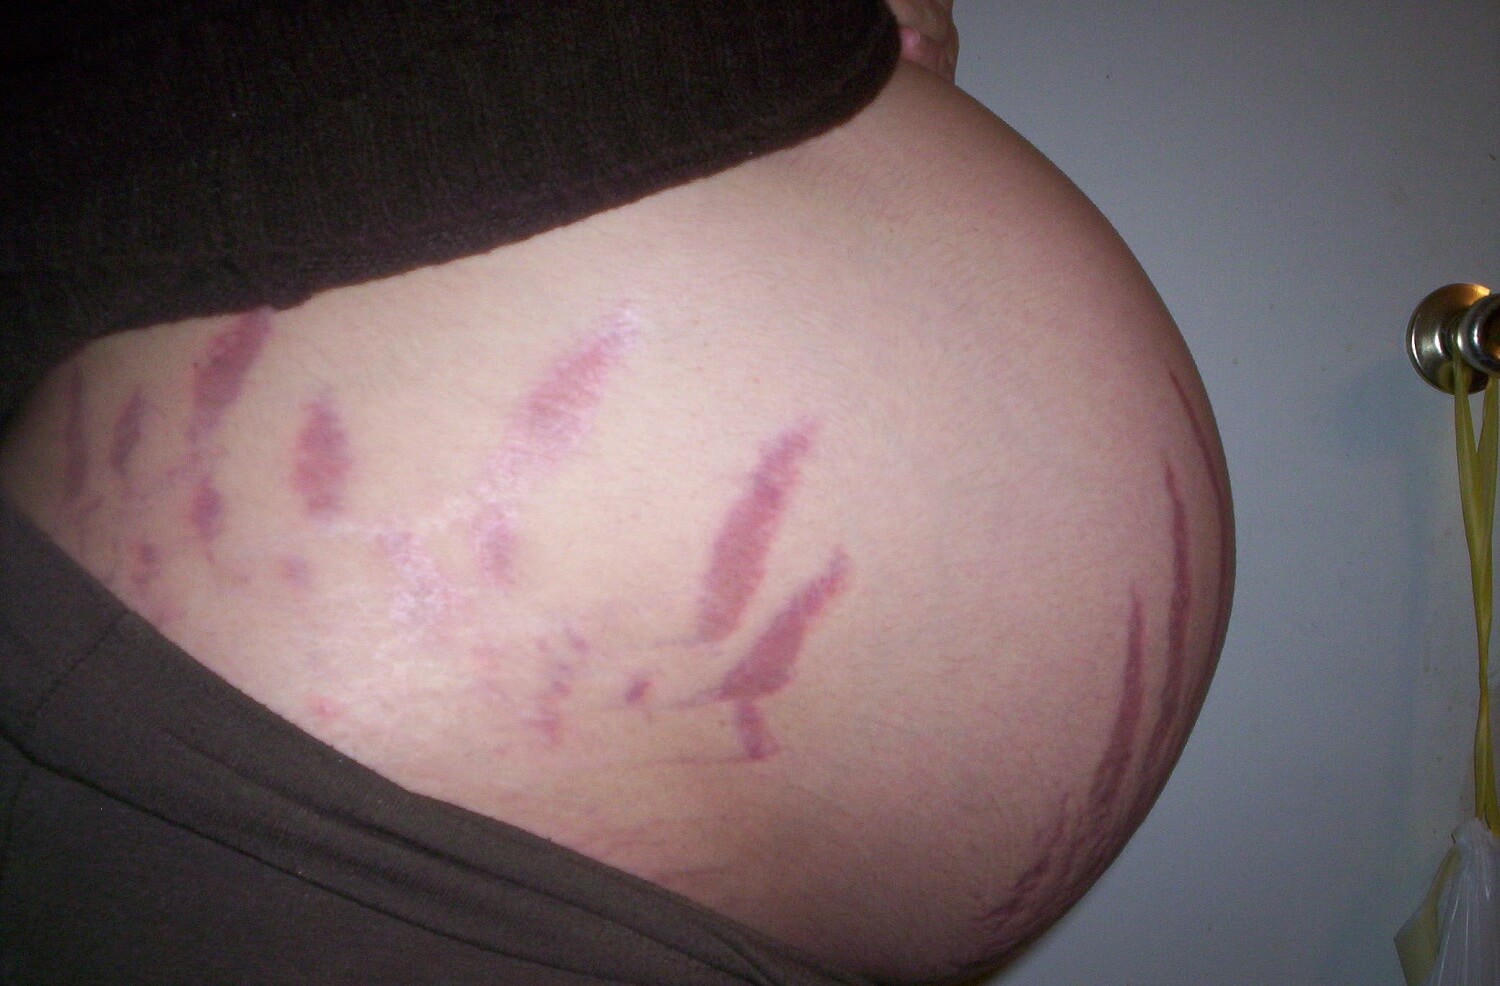 Why Do We Get Stretch Marks During Pregnancy?